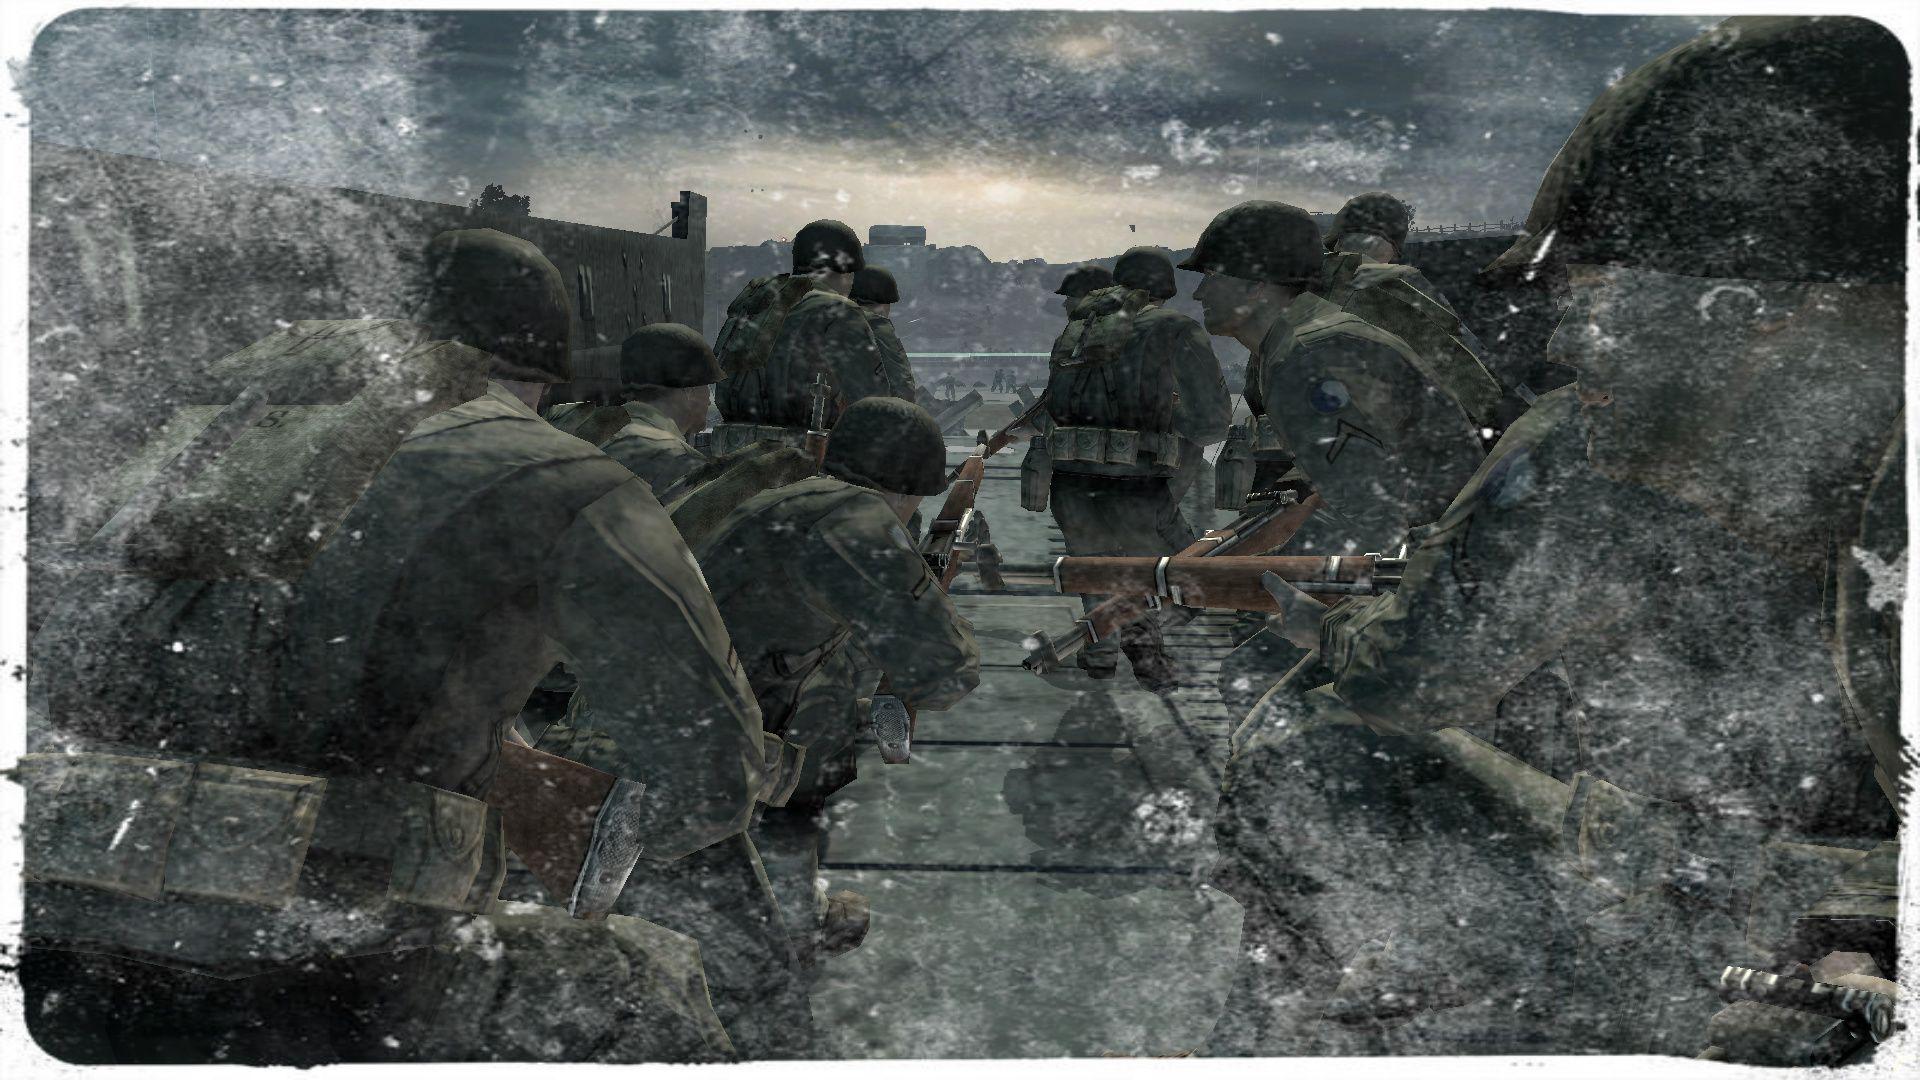 company of heroes wallpapers